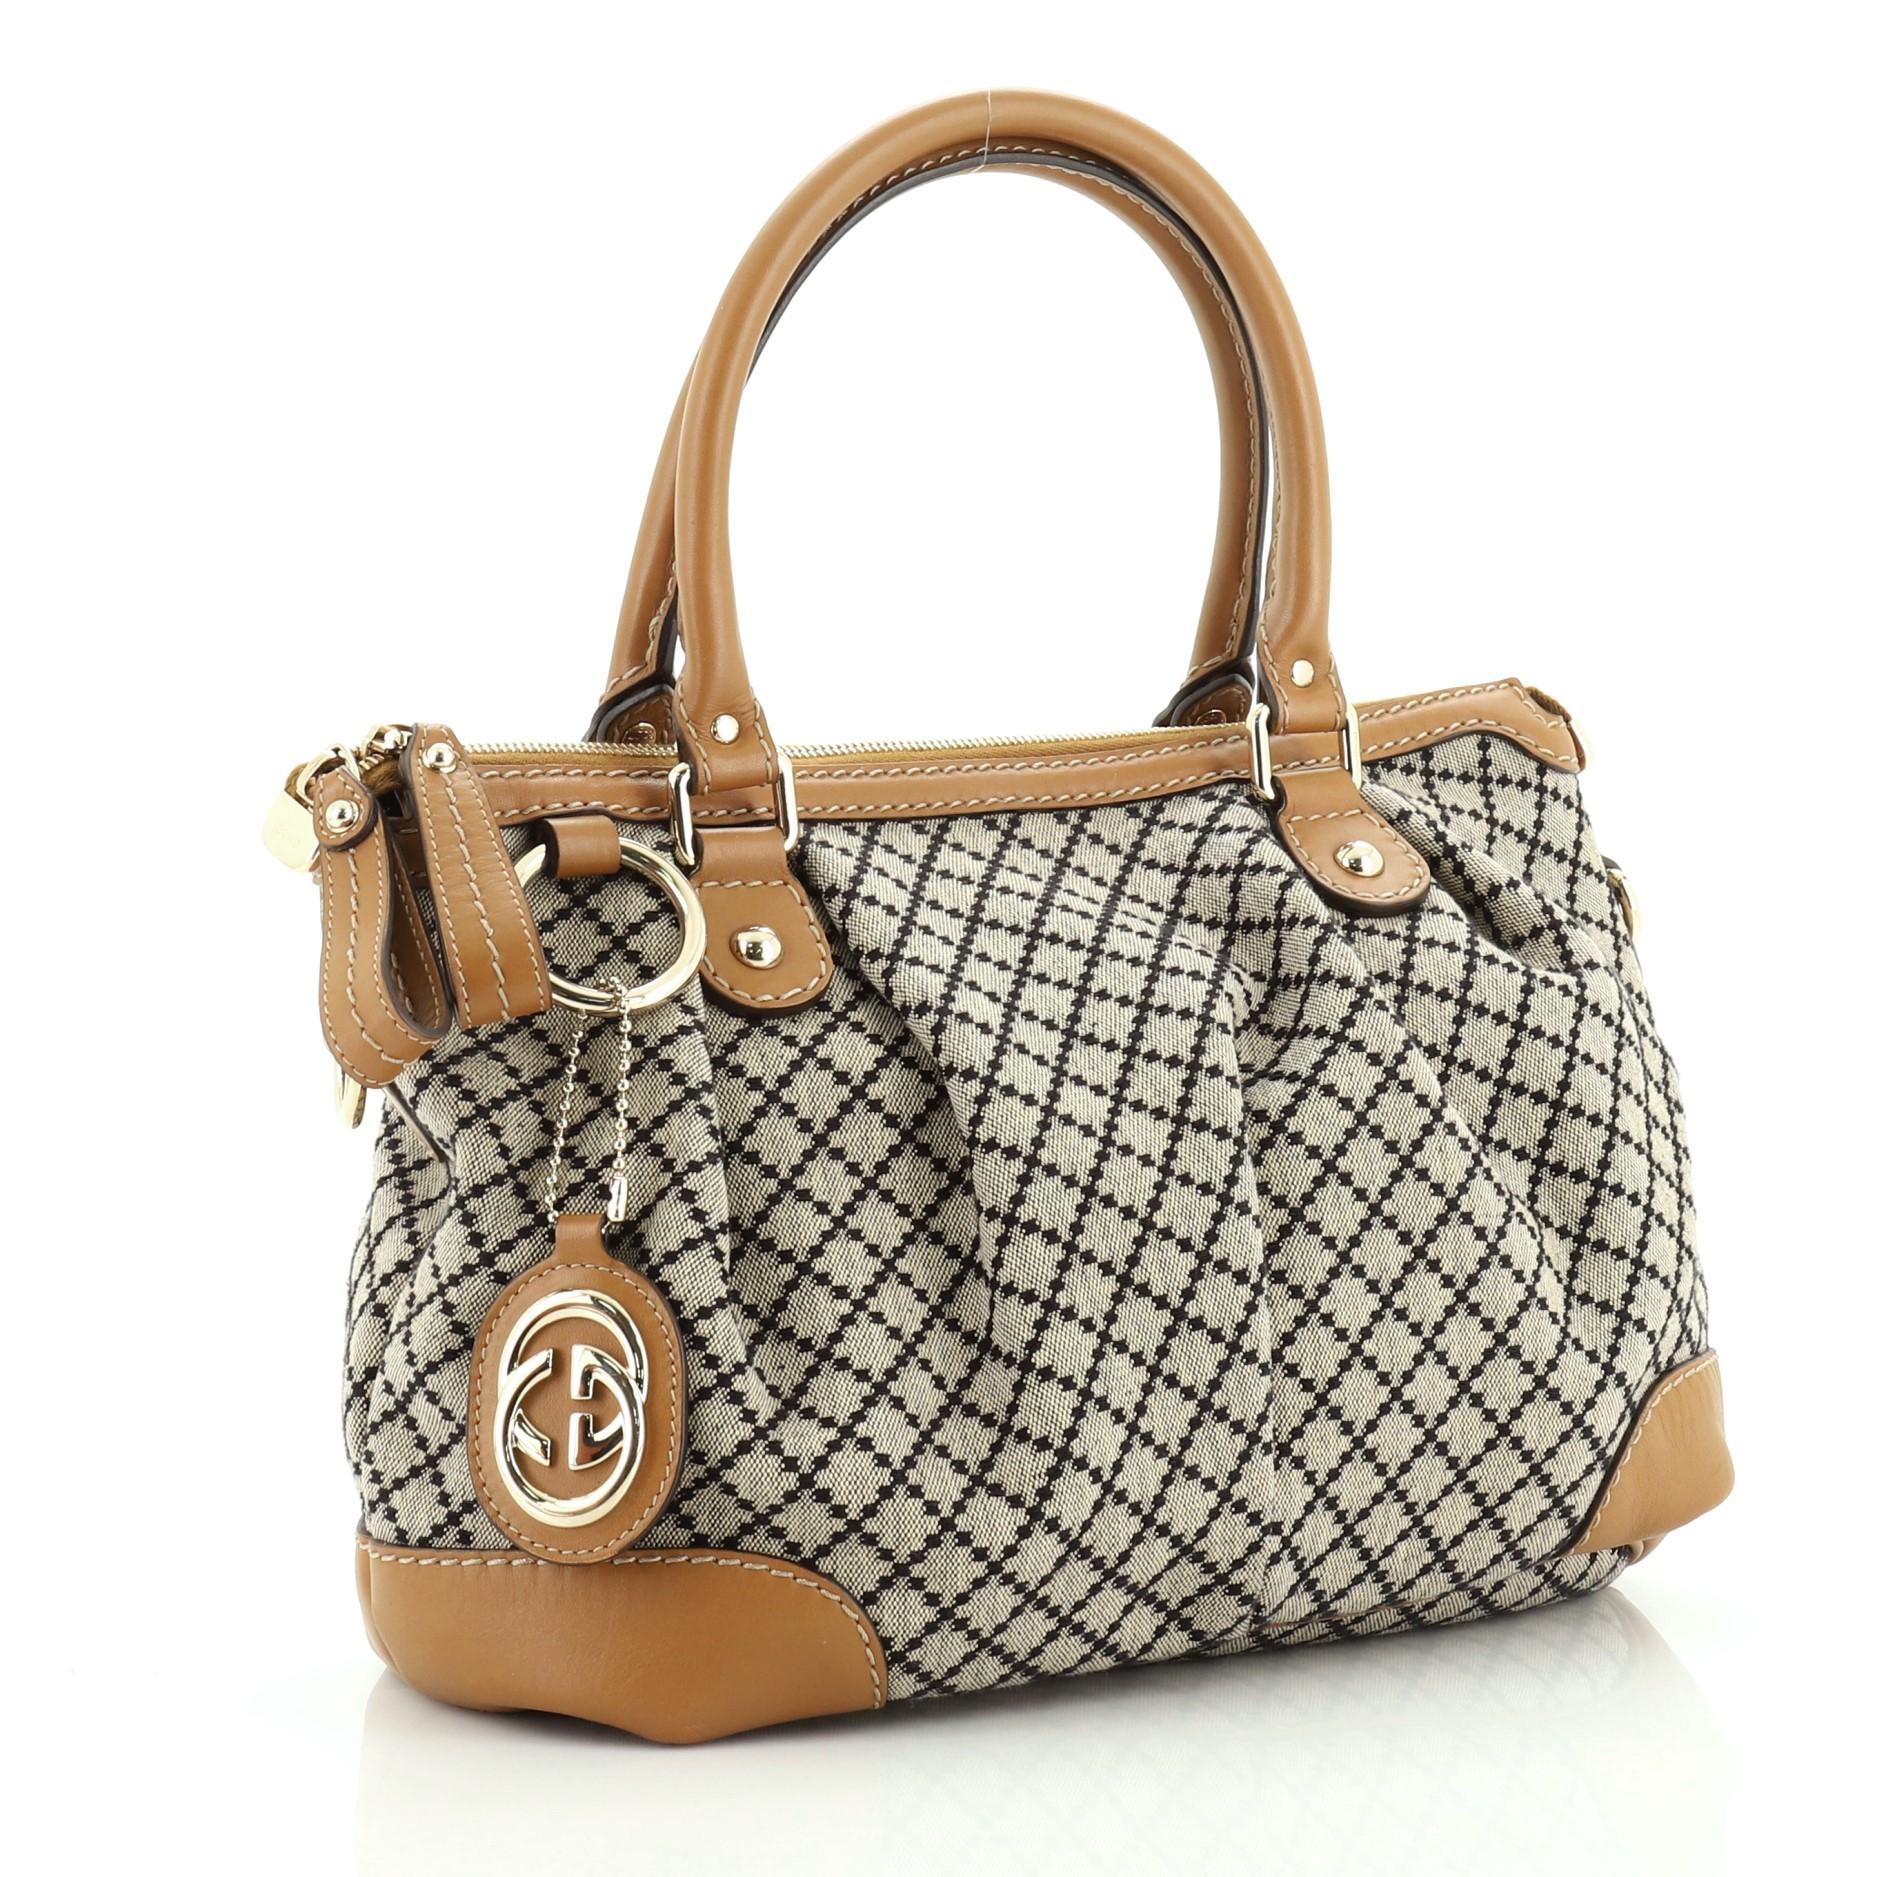 This Gucci Sukey Top Handle Satchel Diamante Canvas Medium, crafted from brown diamante canvas, features dual rolled handles, leather trim, and gold-tone hardware. Its two-way zip closure opens to a neutral fabric interior with side zip and slip